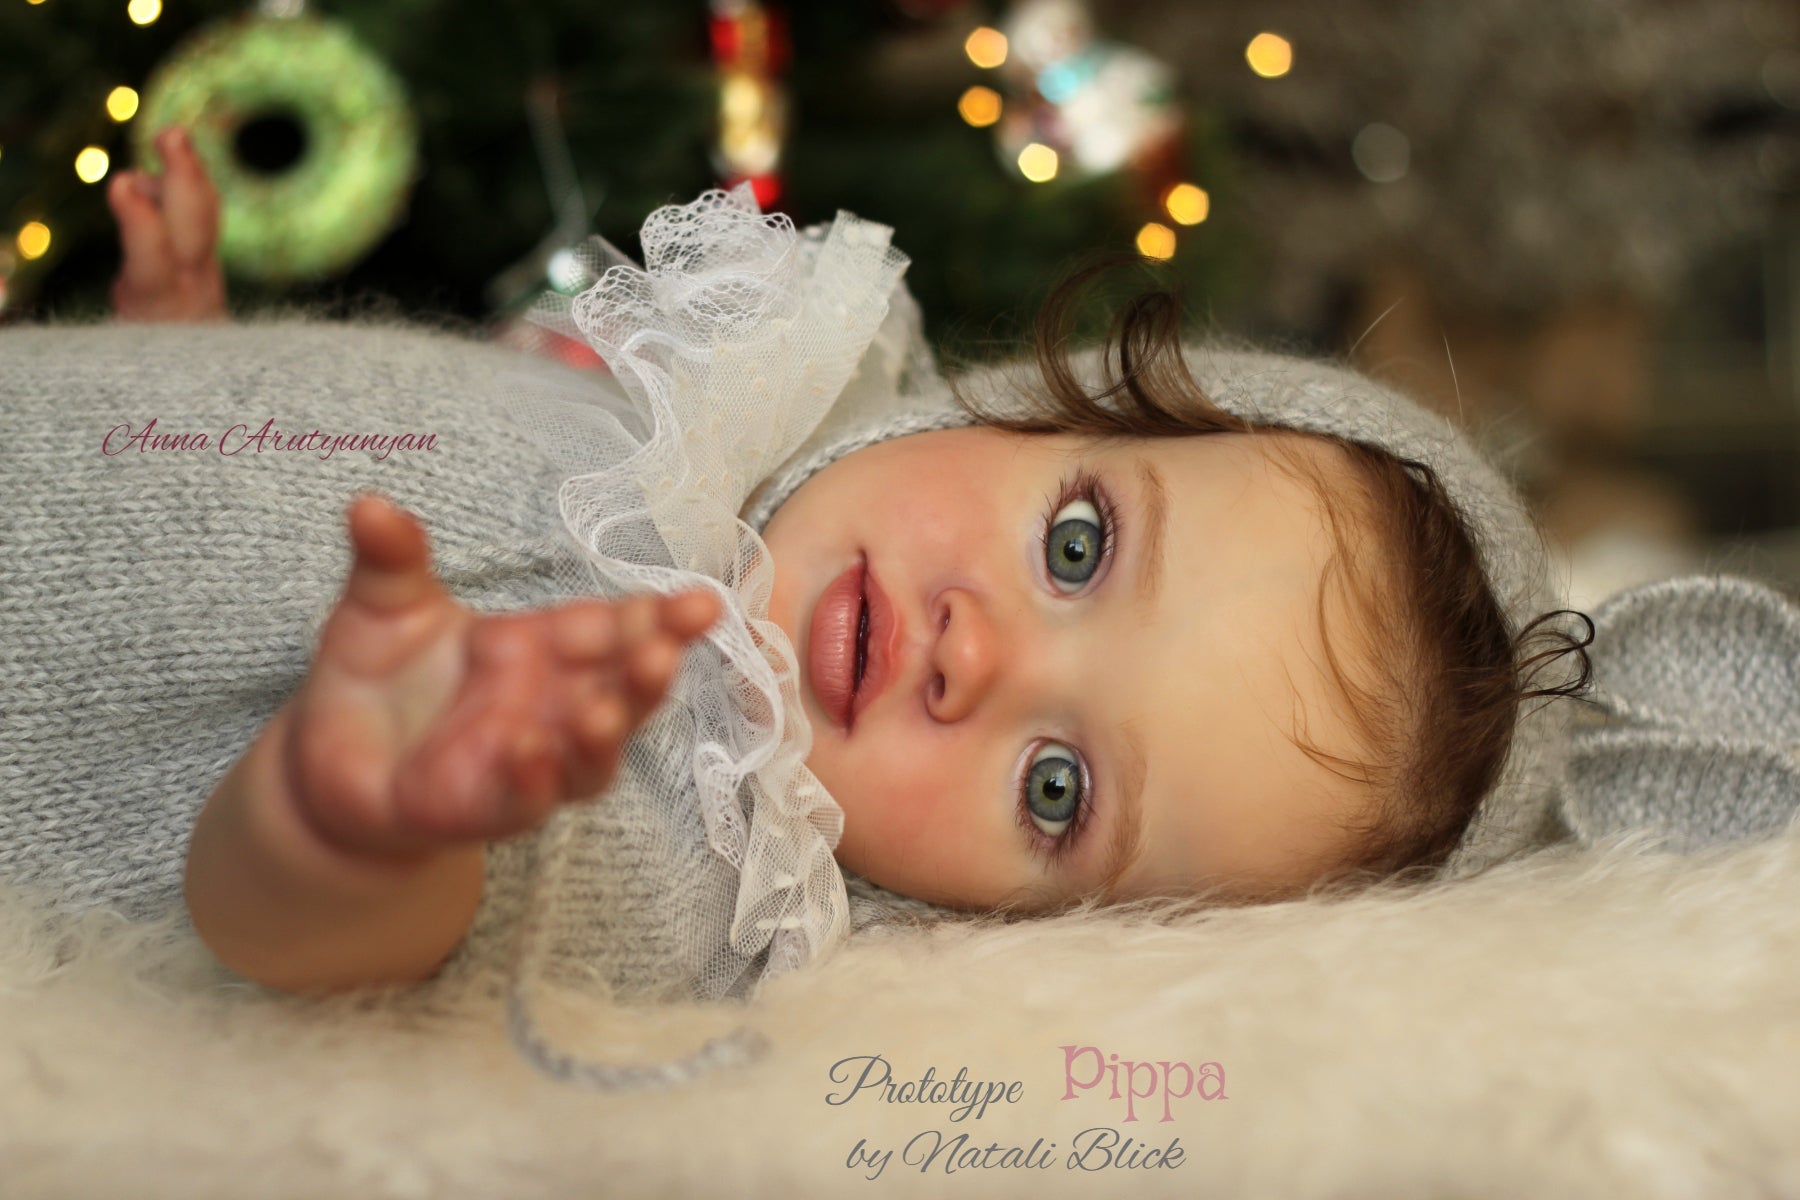 ***PRE-ORDER DEPOSIT ONLY*** Pippa by Natali Blick - Create A Little Magic (Pty) Ltd